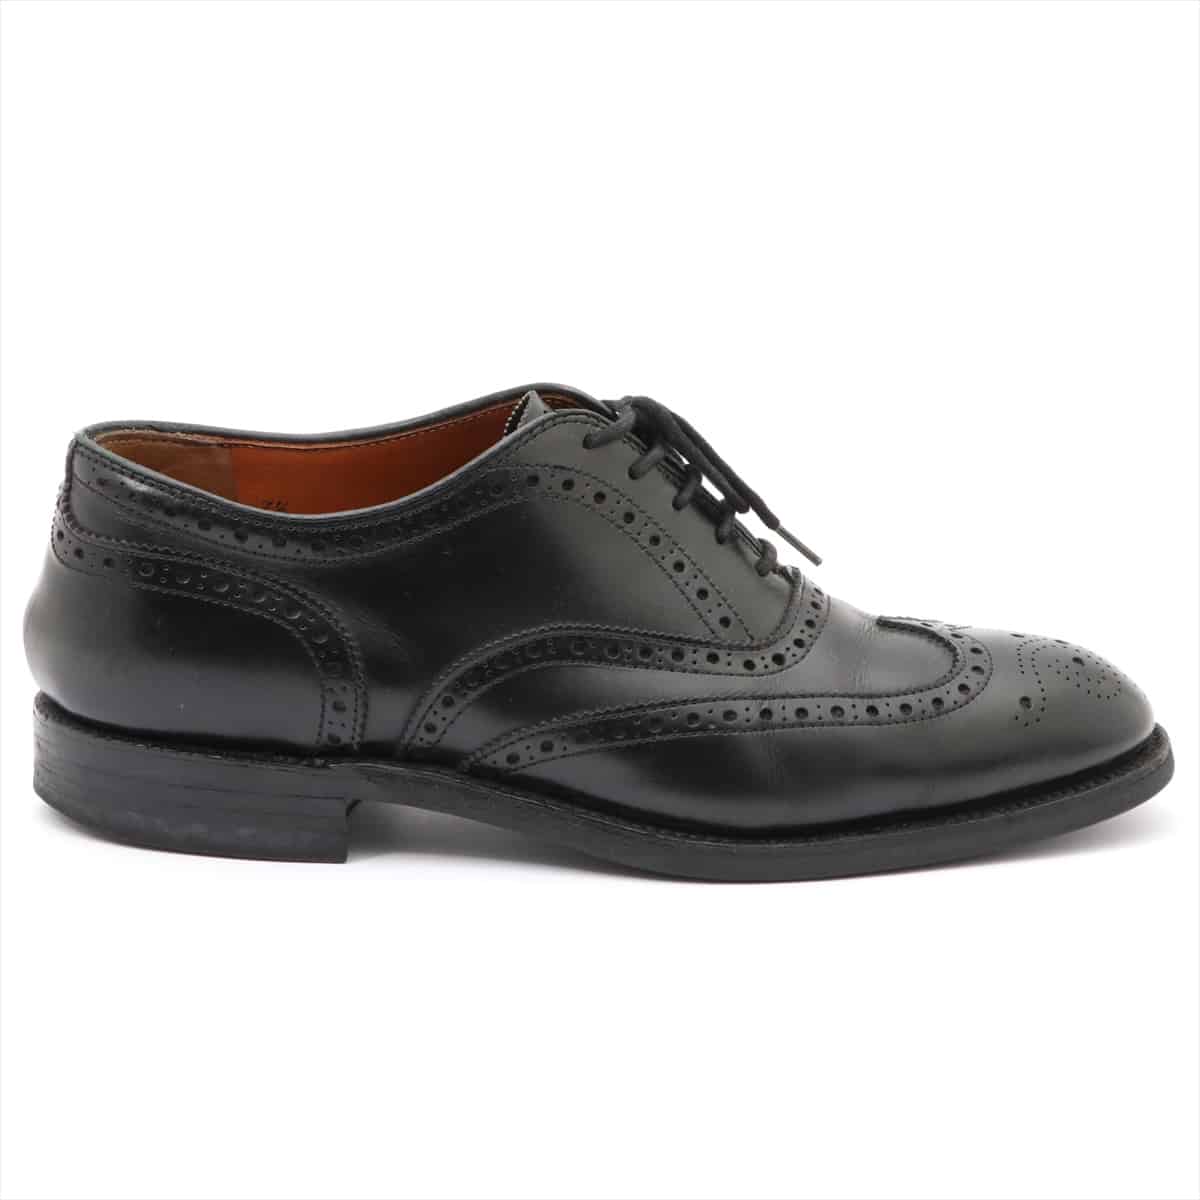 Alden Leather Shoes 7.5 Men's Black Comes with a genuine shoe tree